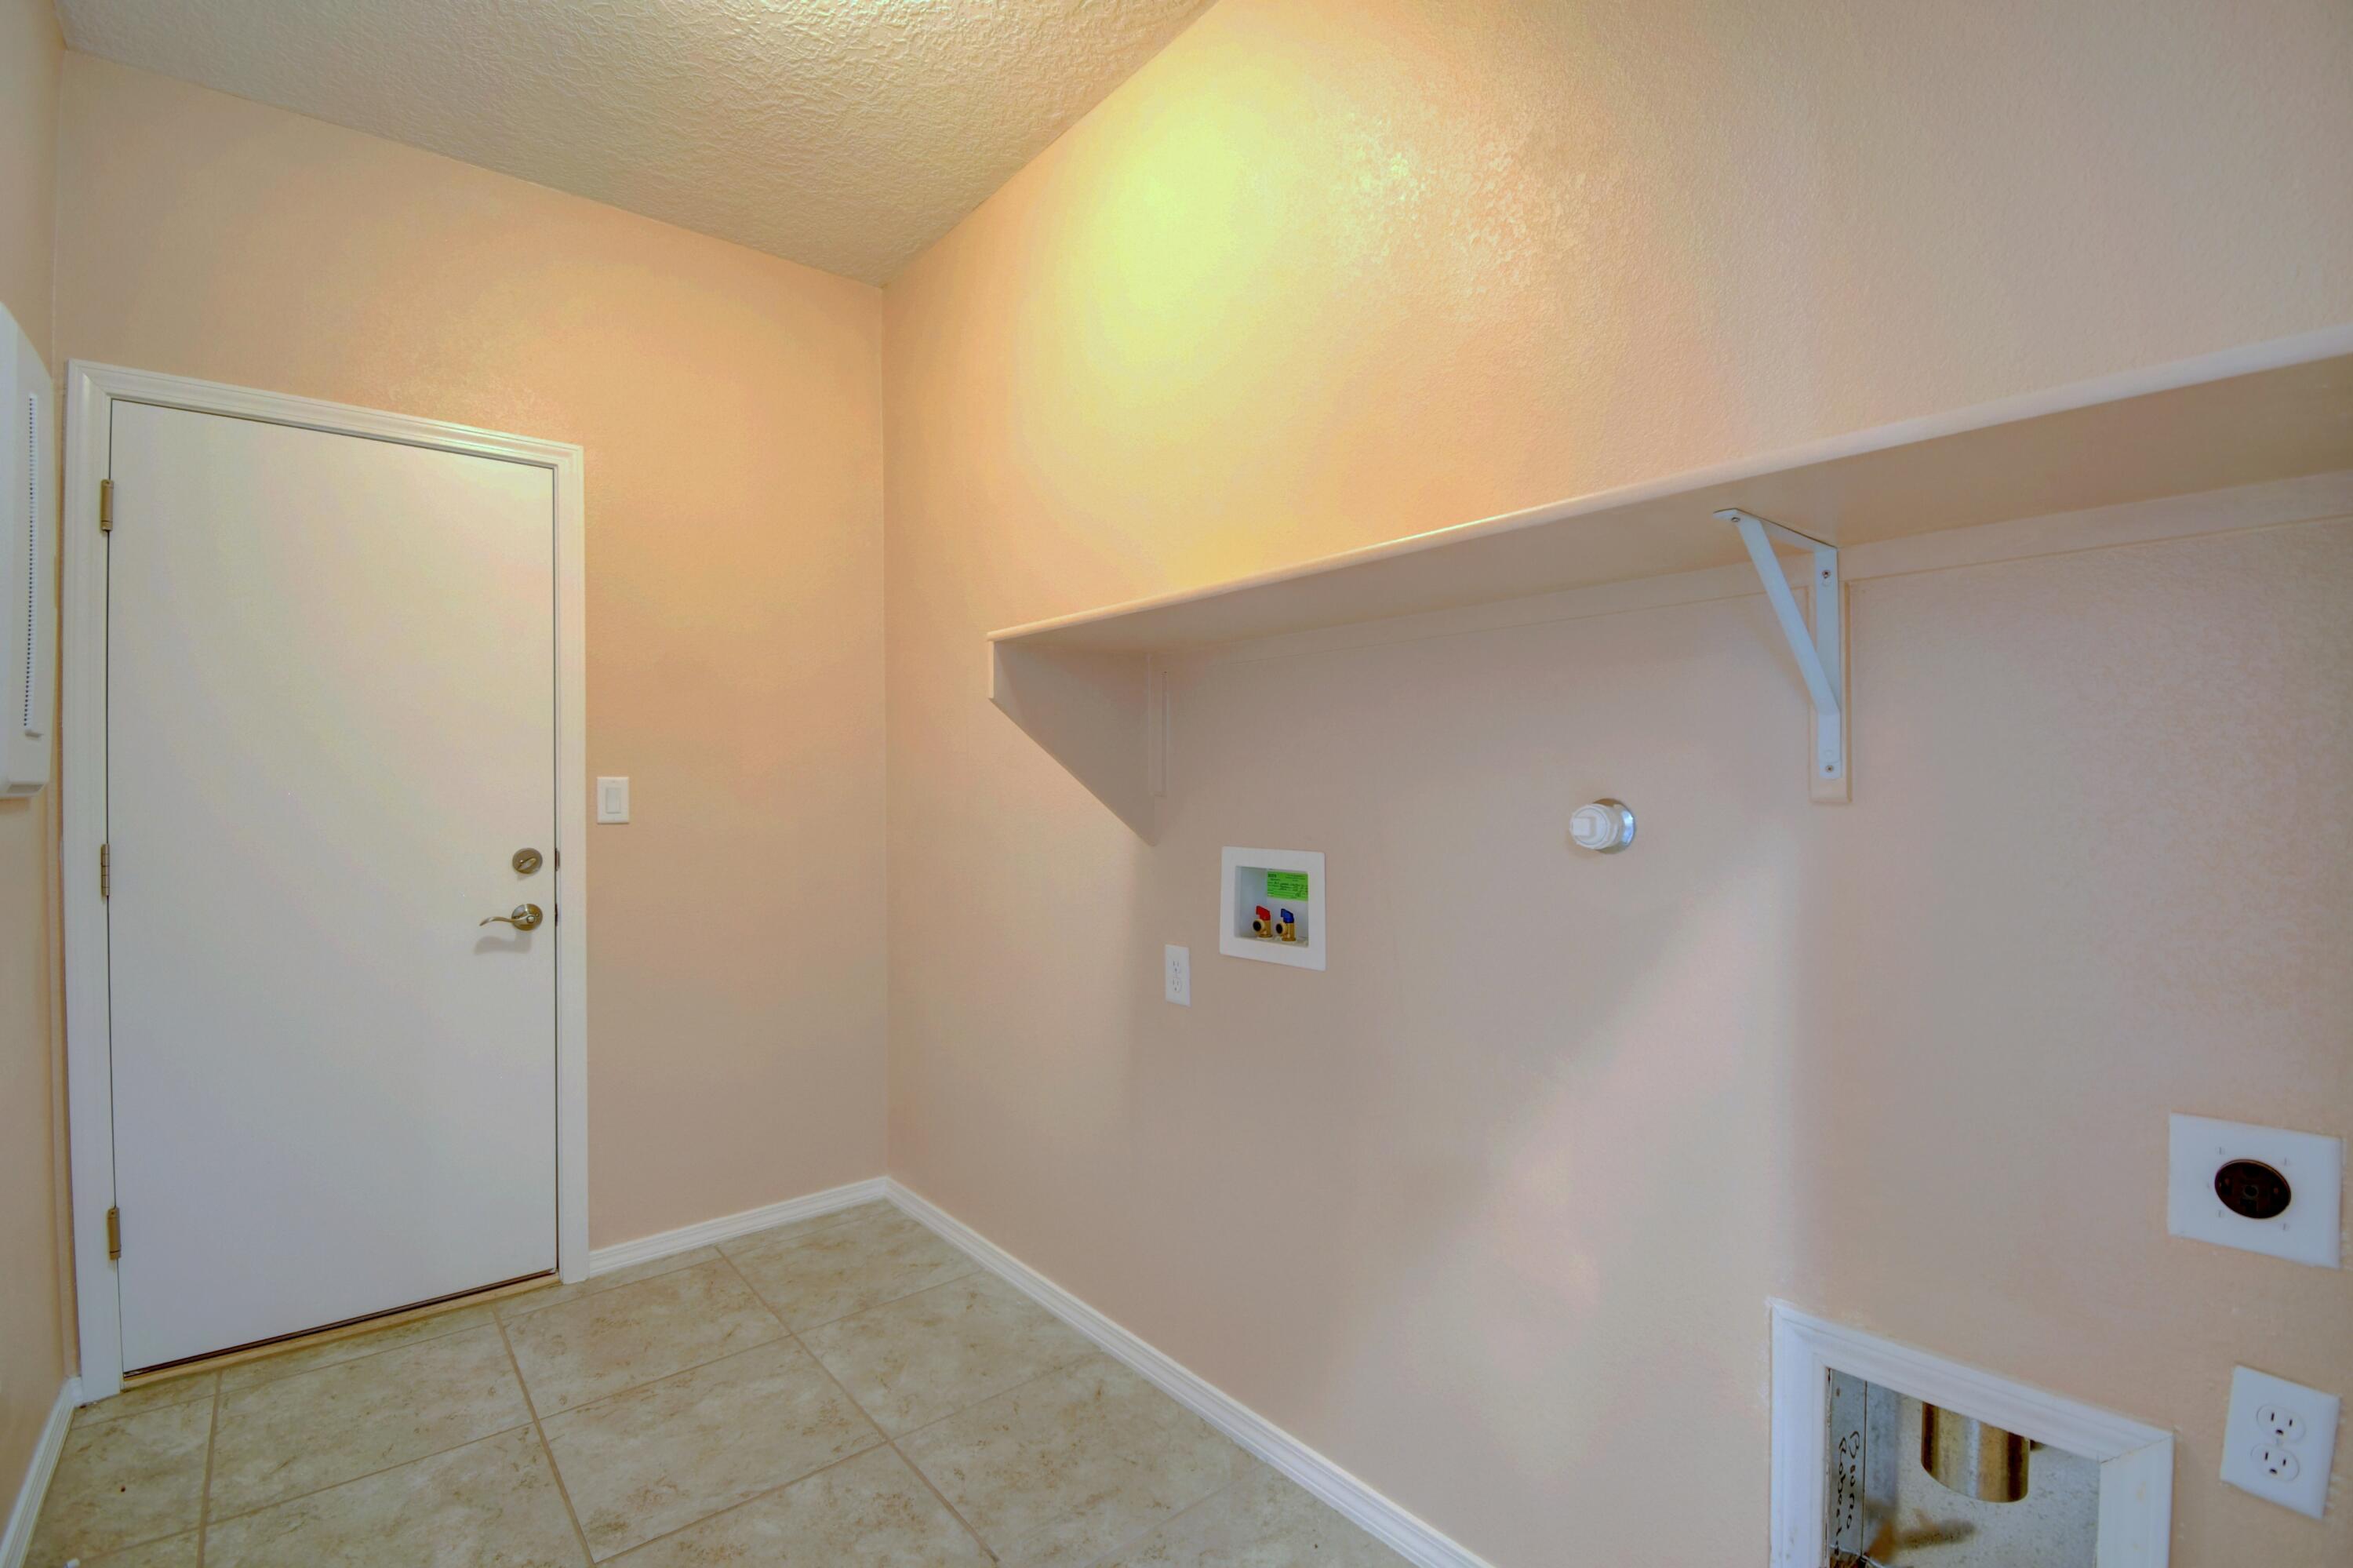 1812 Cooke Canyon Drive NW, Albuquerque, New Mexico 87120, 2 Bedrooms Bedrooms, ,2 BathroomsBathrooms,Residential,For Sale,1812 Cooke Canyon Drive NW,1060991